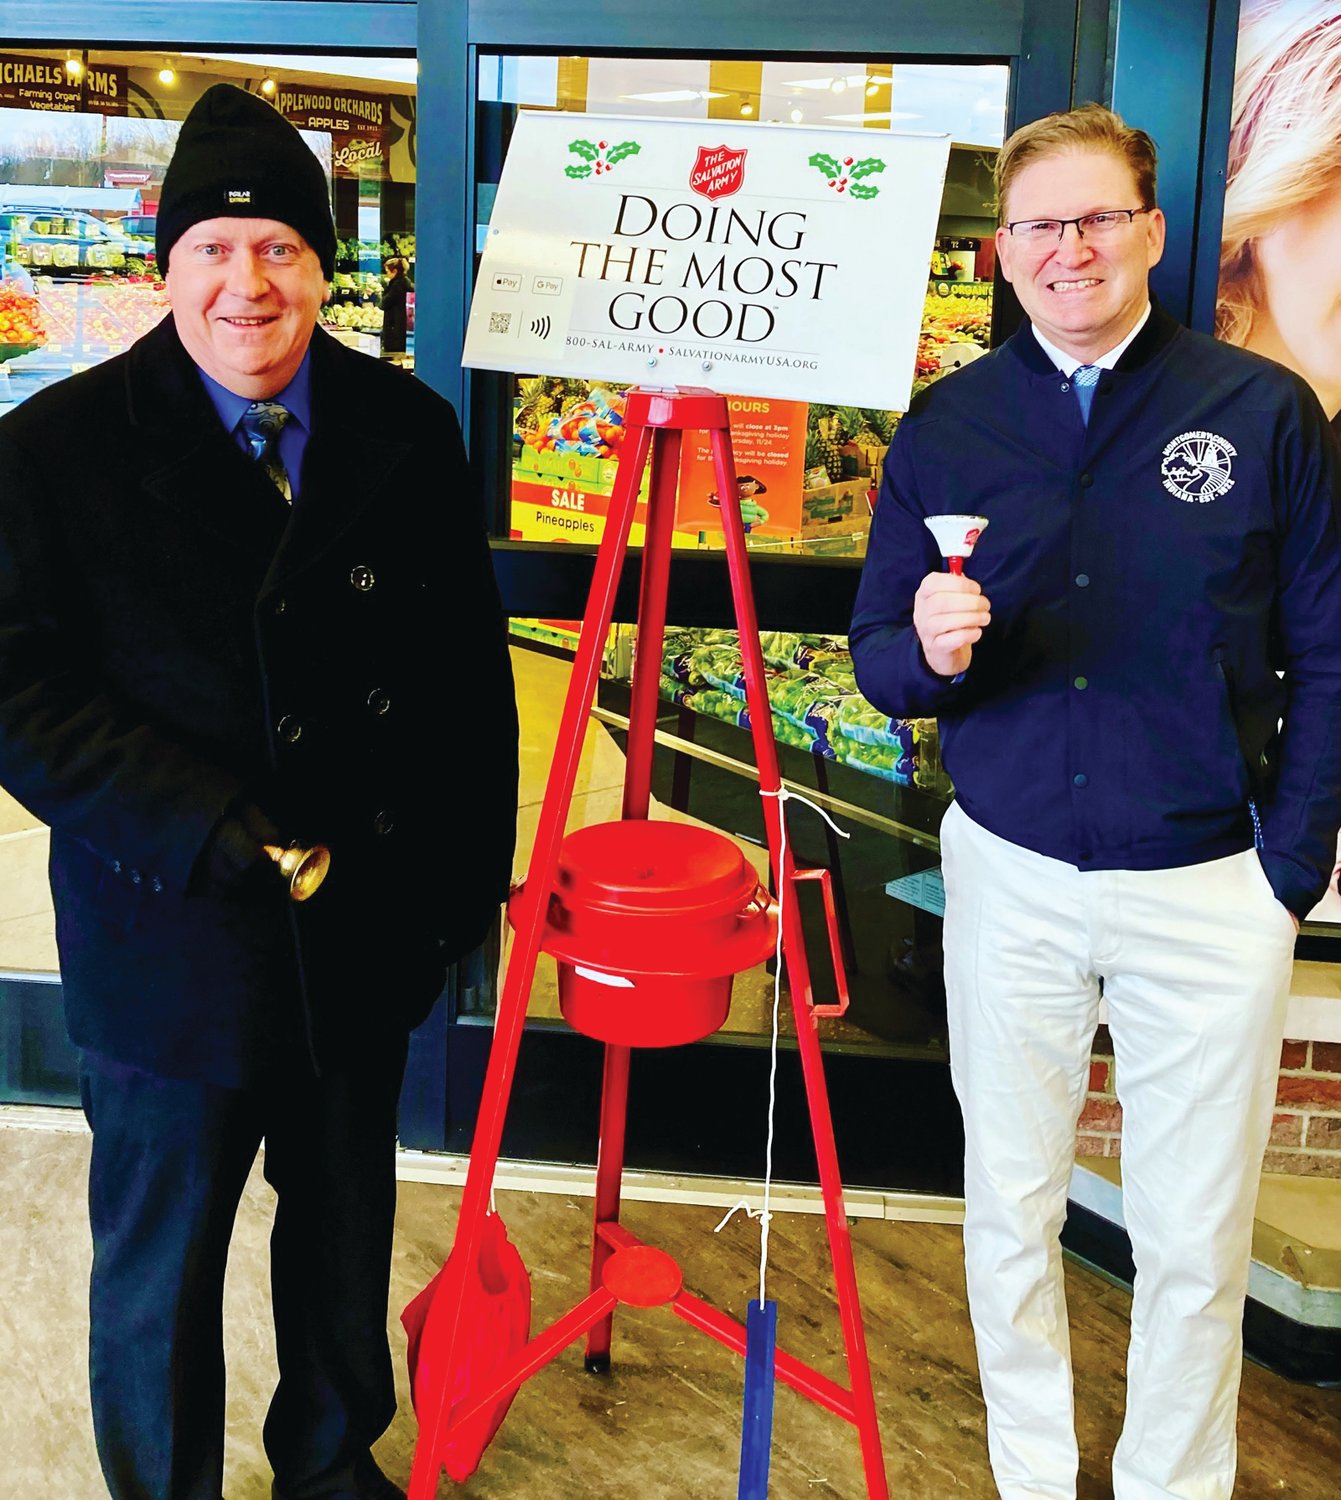 Mayor Todd Barton and County Administrator Tom Klein kicked off the Salvation Army of Montgomery County’s annual Red Kettle Campaign by being the first to ring the bell this season. Donations received in the red kettles are used to provide assistance to those in need in our community throughout 2023. Volunteers are needed to ring the bell at both Walmart and Kroger from 10 a.m. to 8 p.m. Ringers are asked to commit to ringing for two hours. Businesses, churches, community organizations, school groups, individuals, and families who want to make a difference in Montgomery County are encouraged to ring the bell. Those who want to ring the bell can sign up by contacting Clay Adams at 765-376-7194 or by registering online at www.registertoring.com.